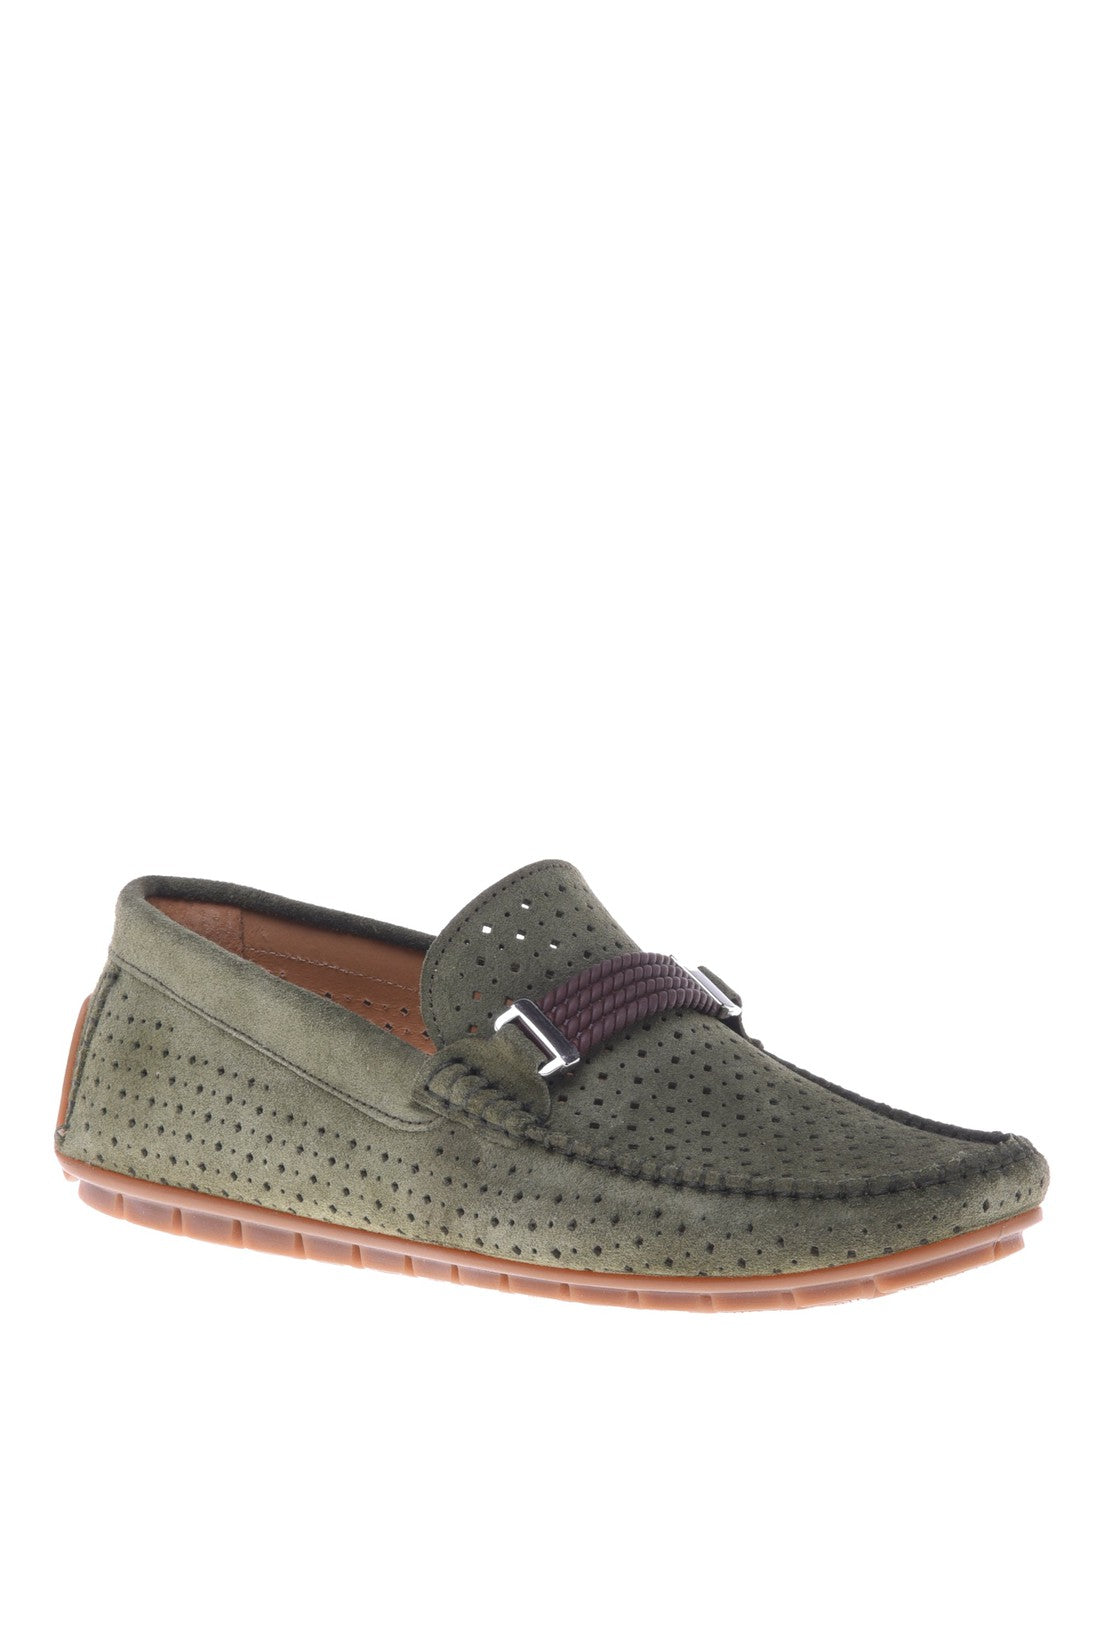 Loafer in green perforated suede